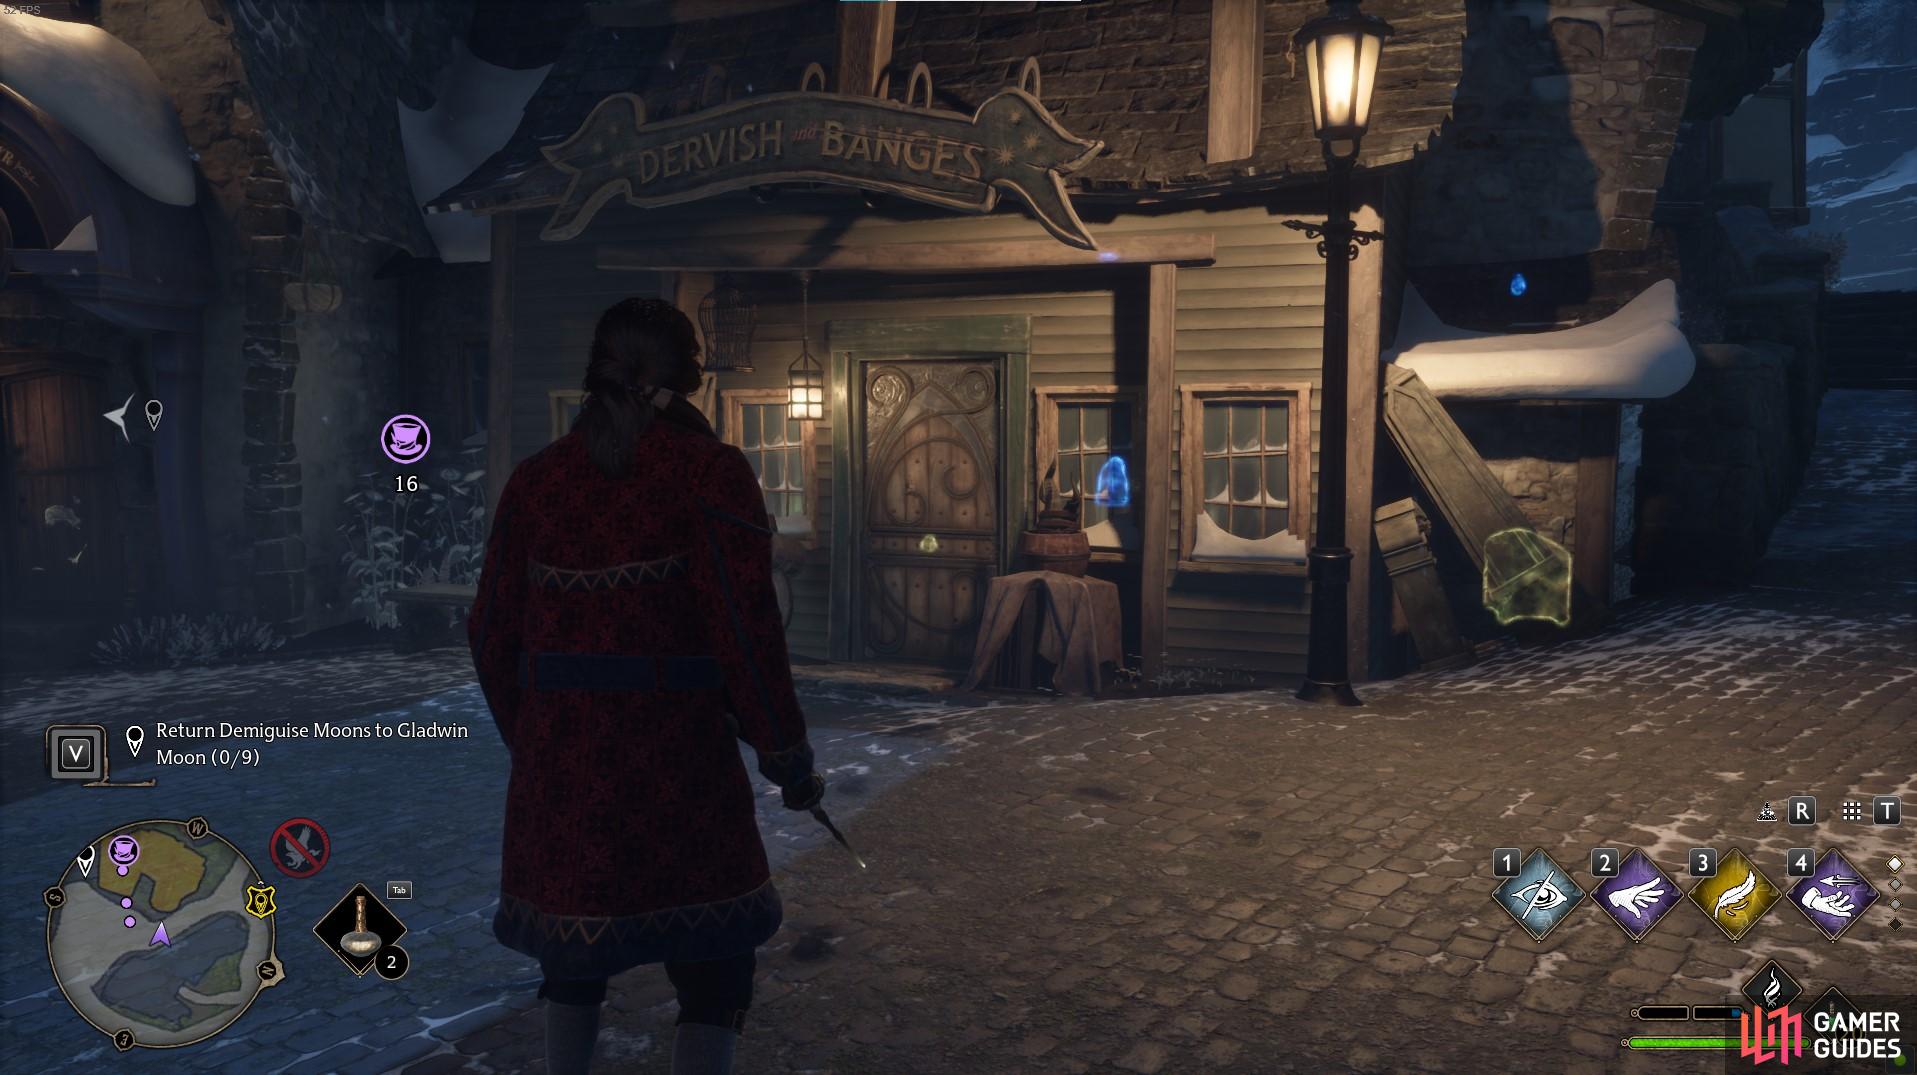 Go into the Tinkerer's store next to the fashion store for the next Demiguise Moon in !Hogsmeade.